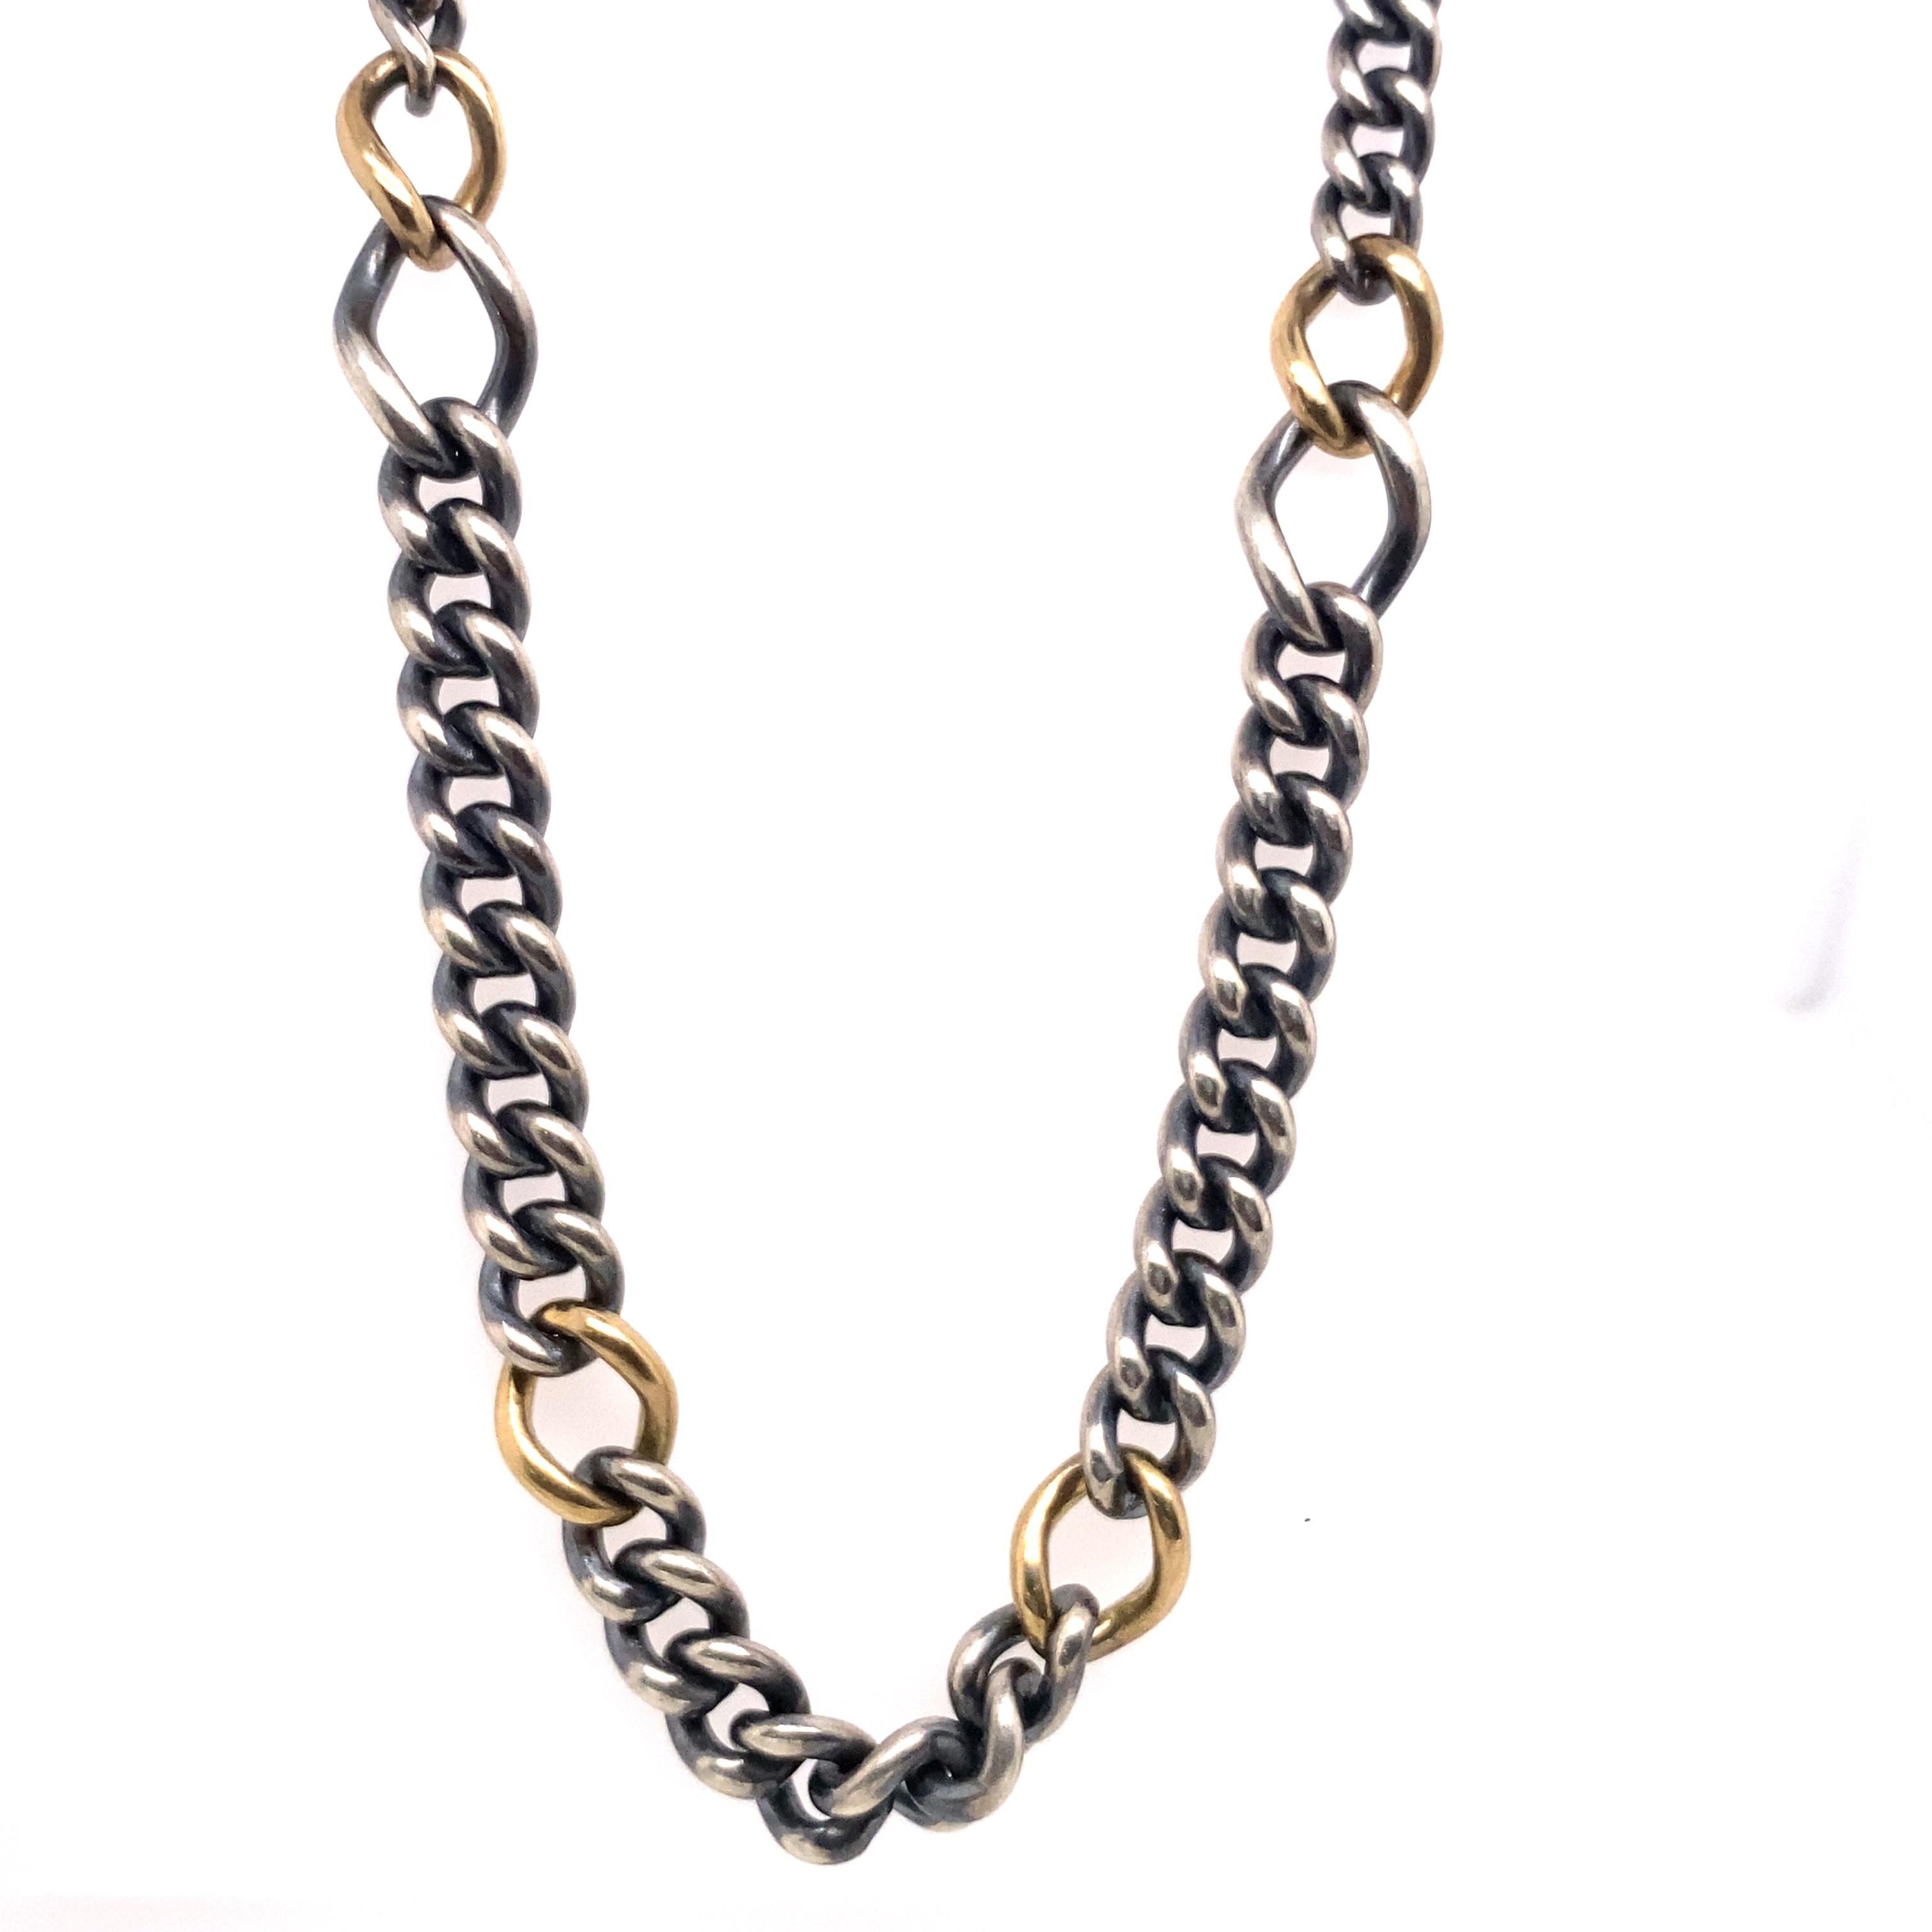 Modern Hum 18ct Yellow Gold & Silver Curb Chain Necklace With Twist-Lock Closure For Sale